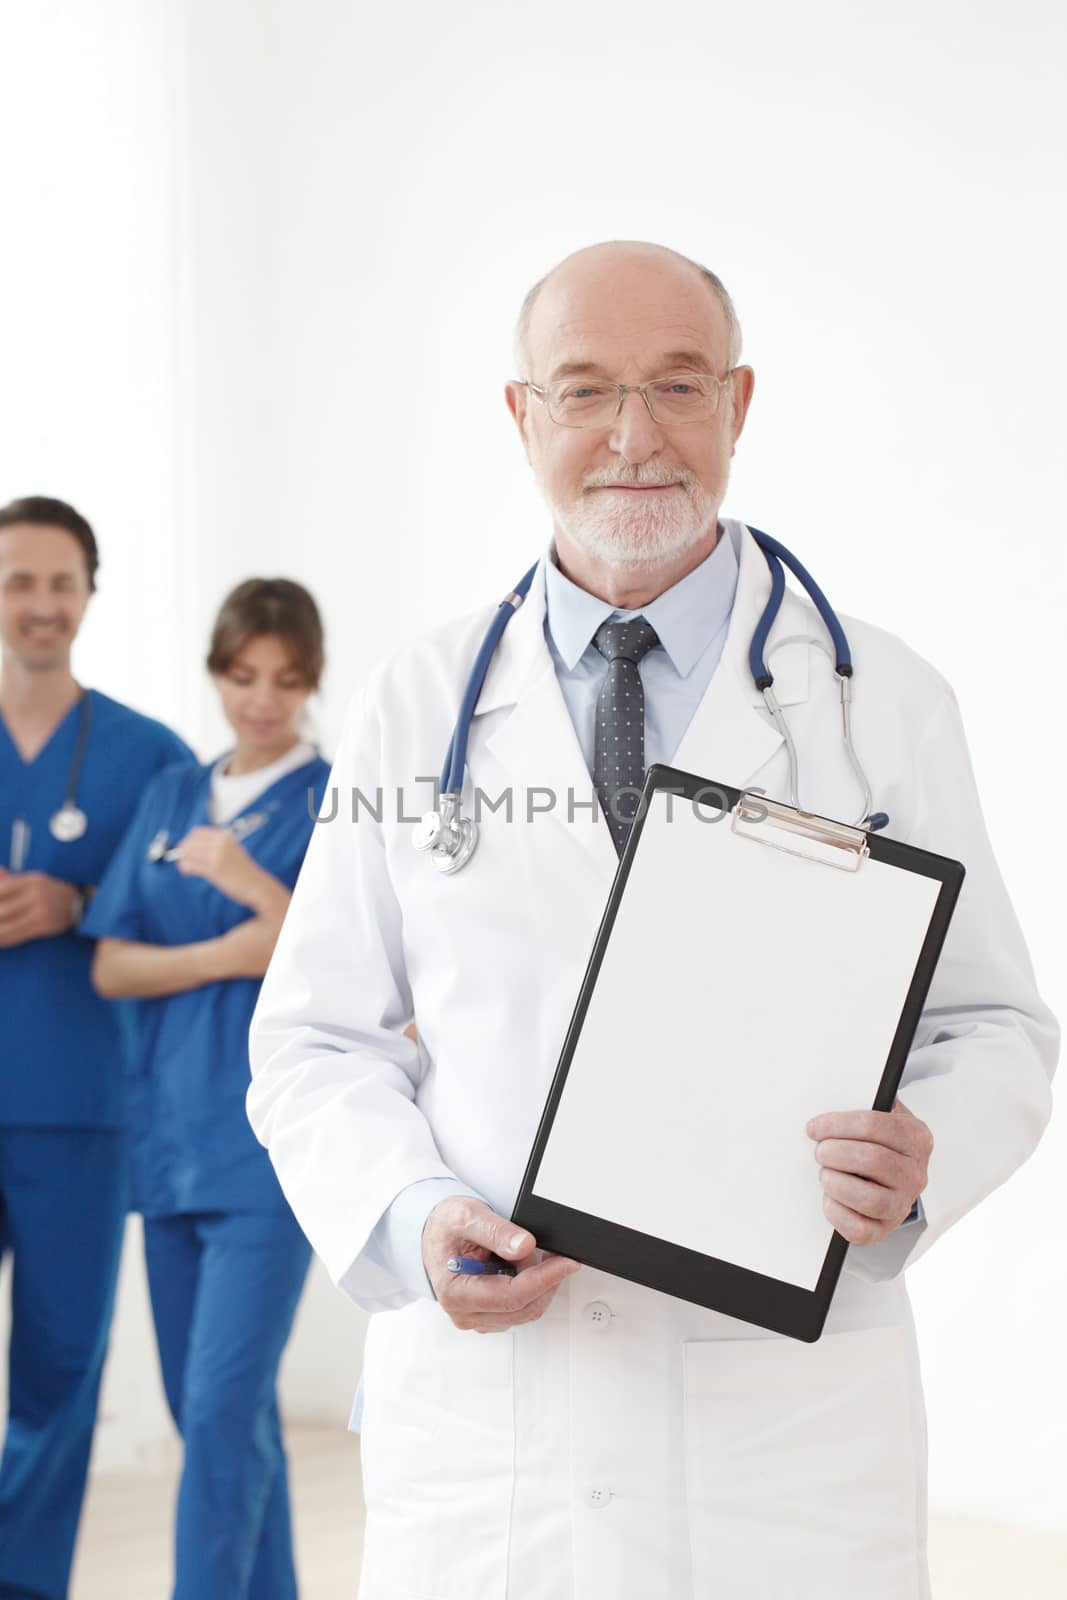 Smiling team of doctors and nurses on white background